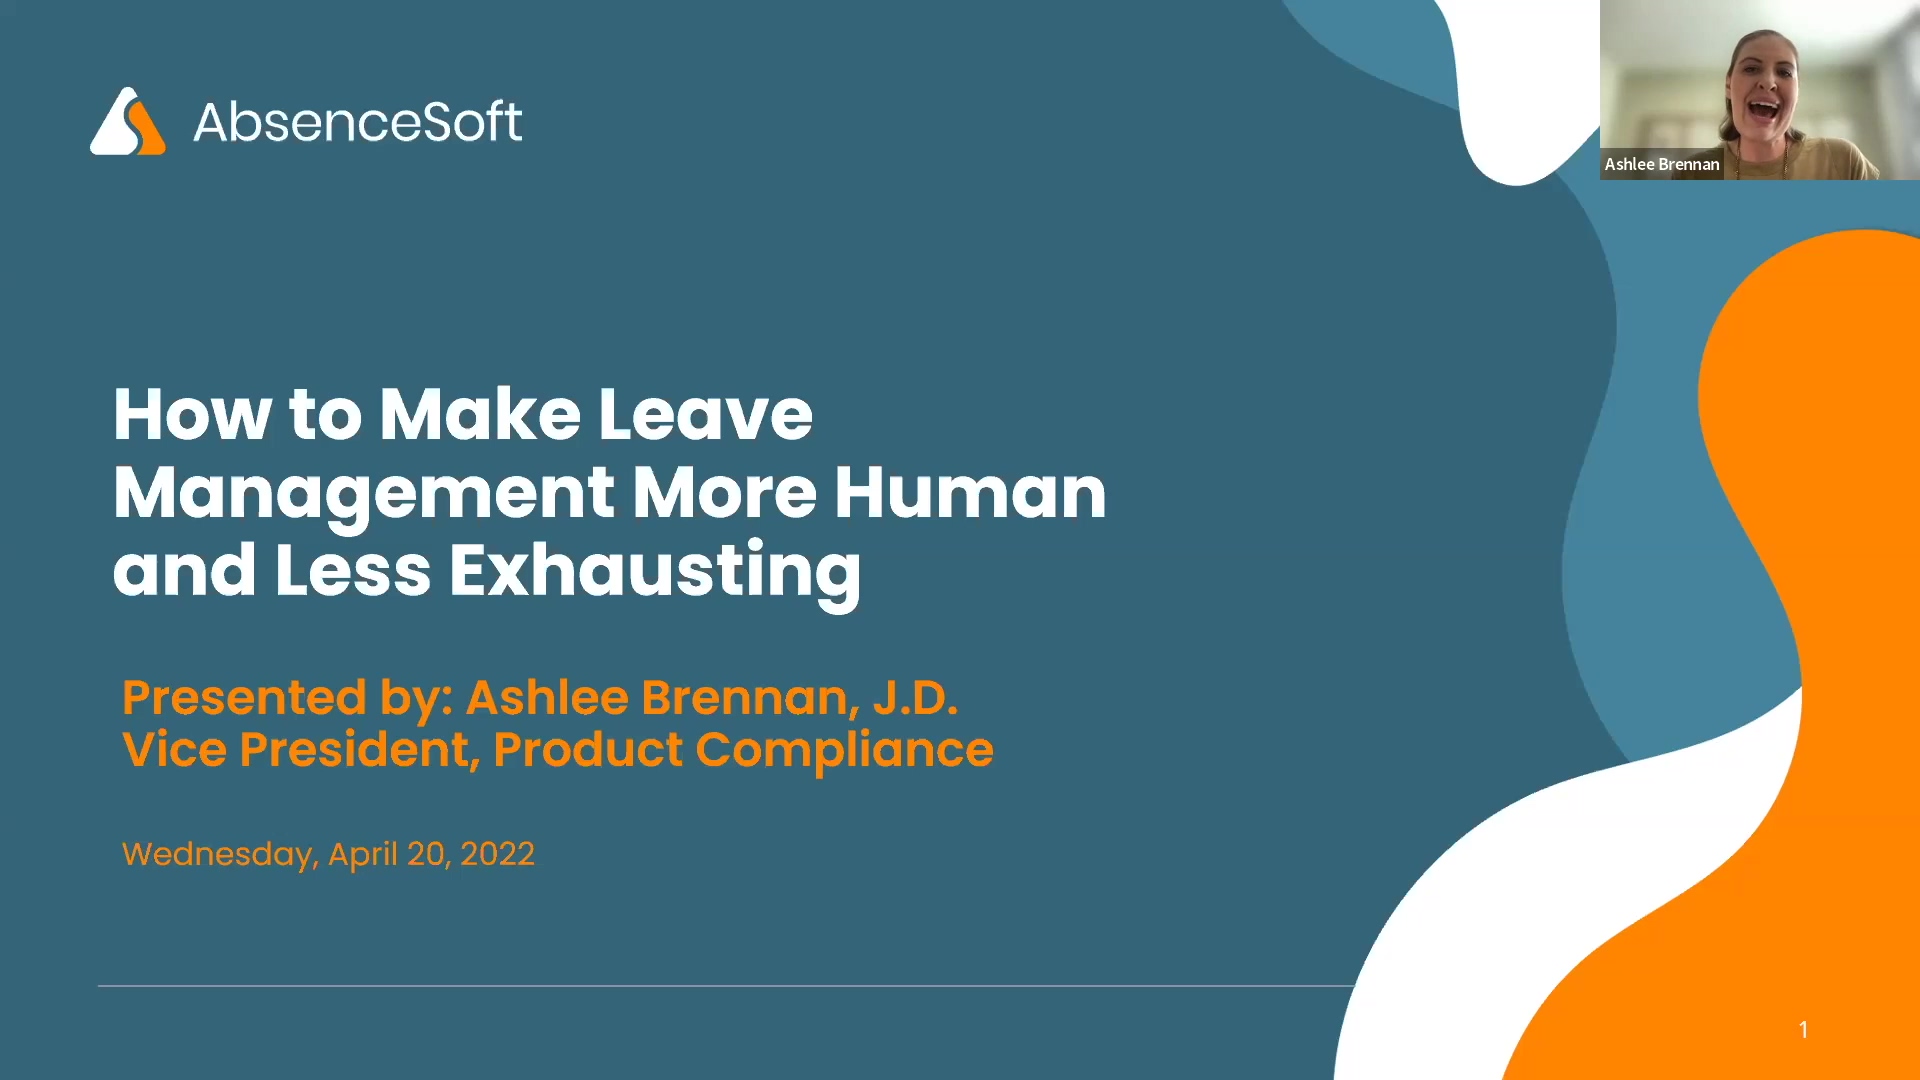 How to Make Leave Management More Human and Less Exhausting